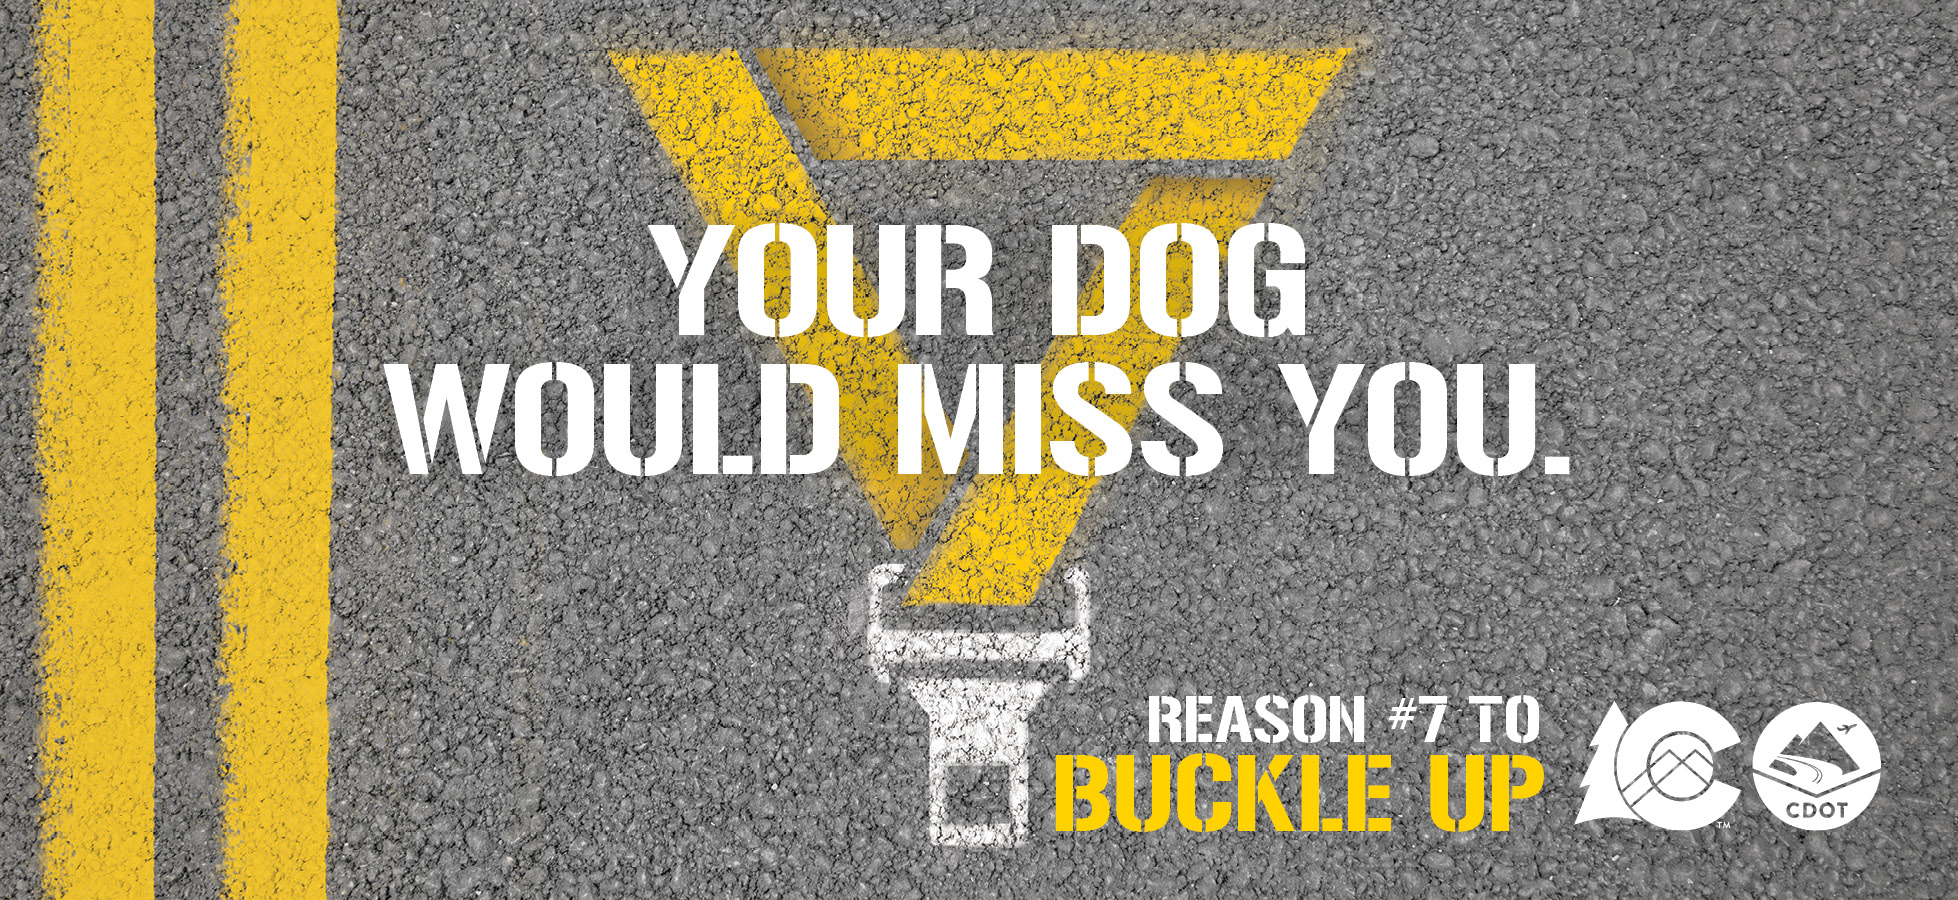 Reason 7 to Buckle Up - Your Dog Would Miss You graphic detail image